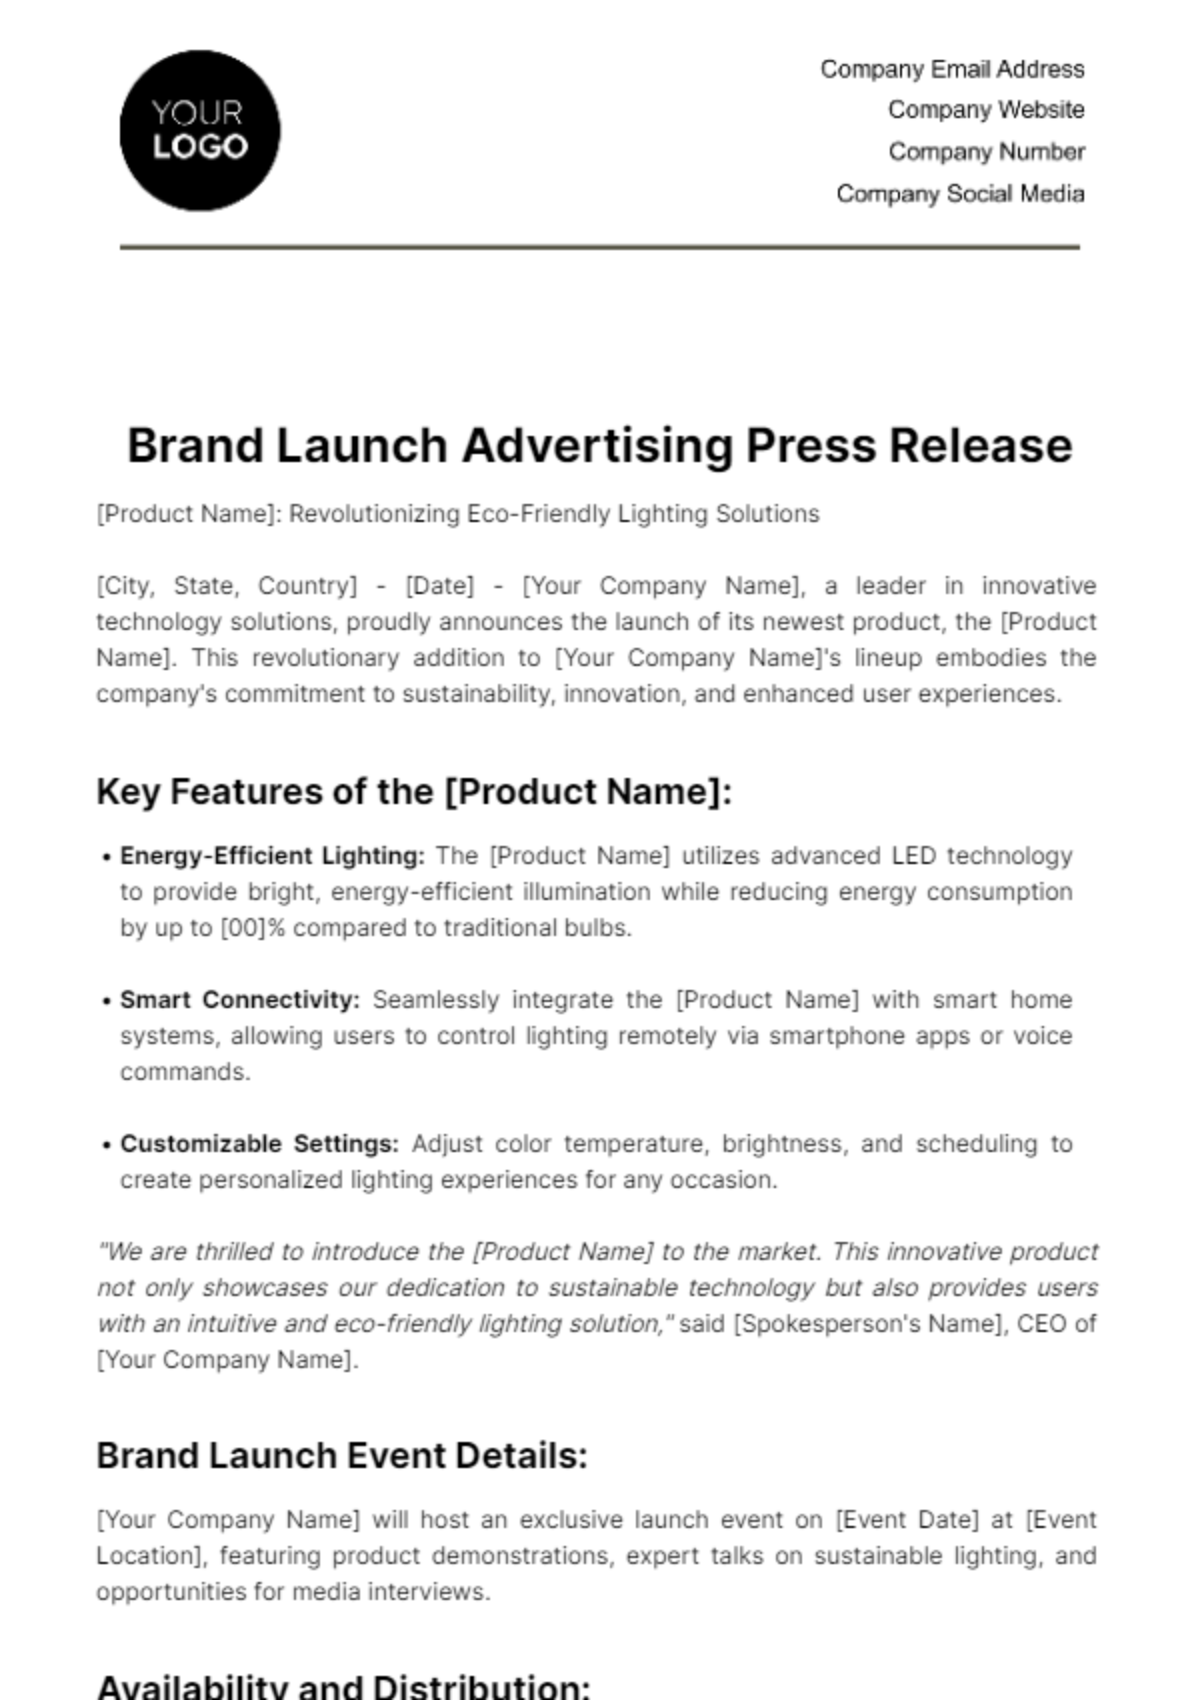 Free Brand Launch Advertising Press Release Template